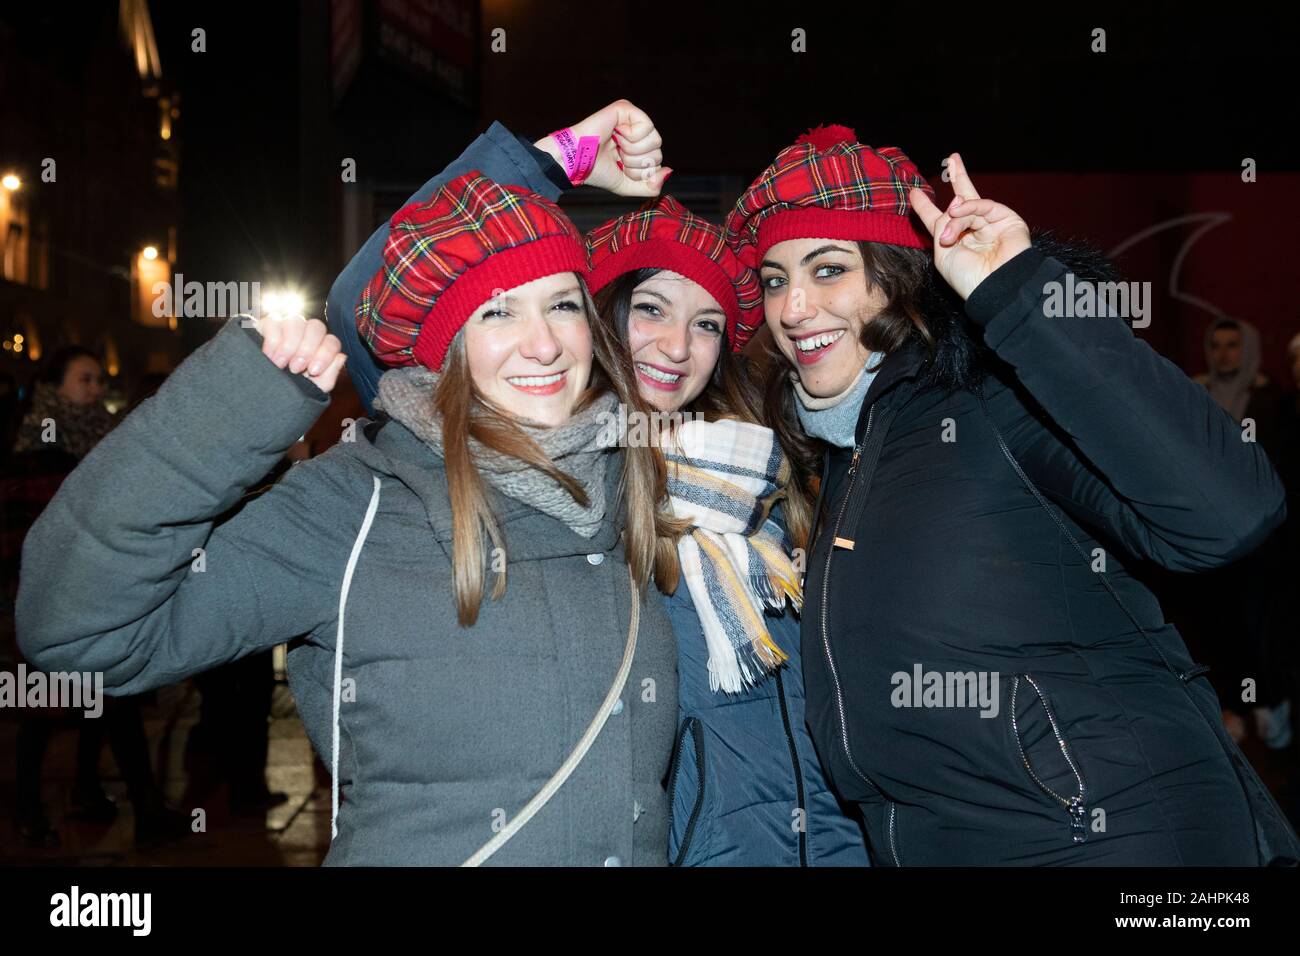 Revellers from Italy enjoy the street party on Princes Street during the Hogmanay New Year celebrations in Edinburgh. Stock Photo